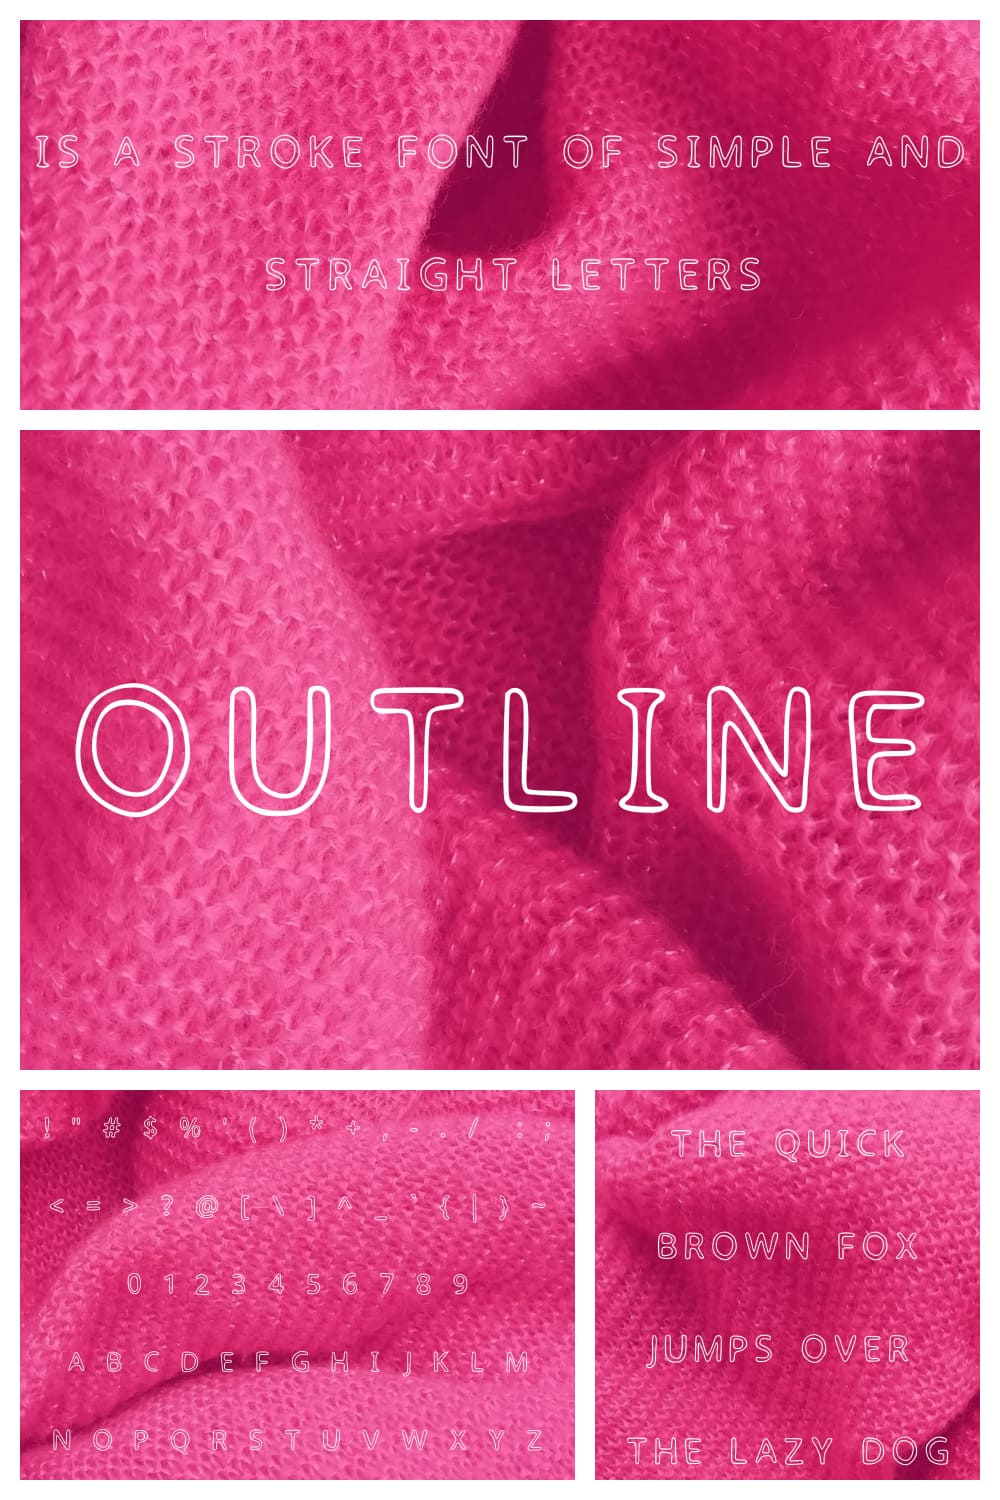 Outline is a stroke font of simple and strait letters.